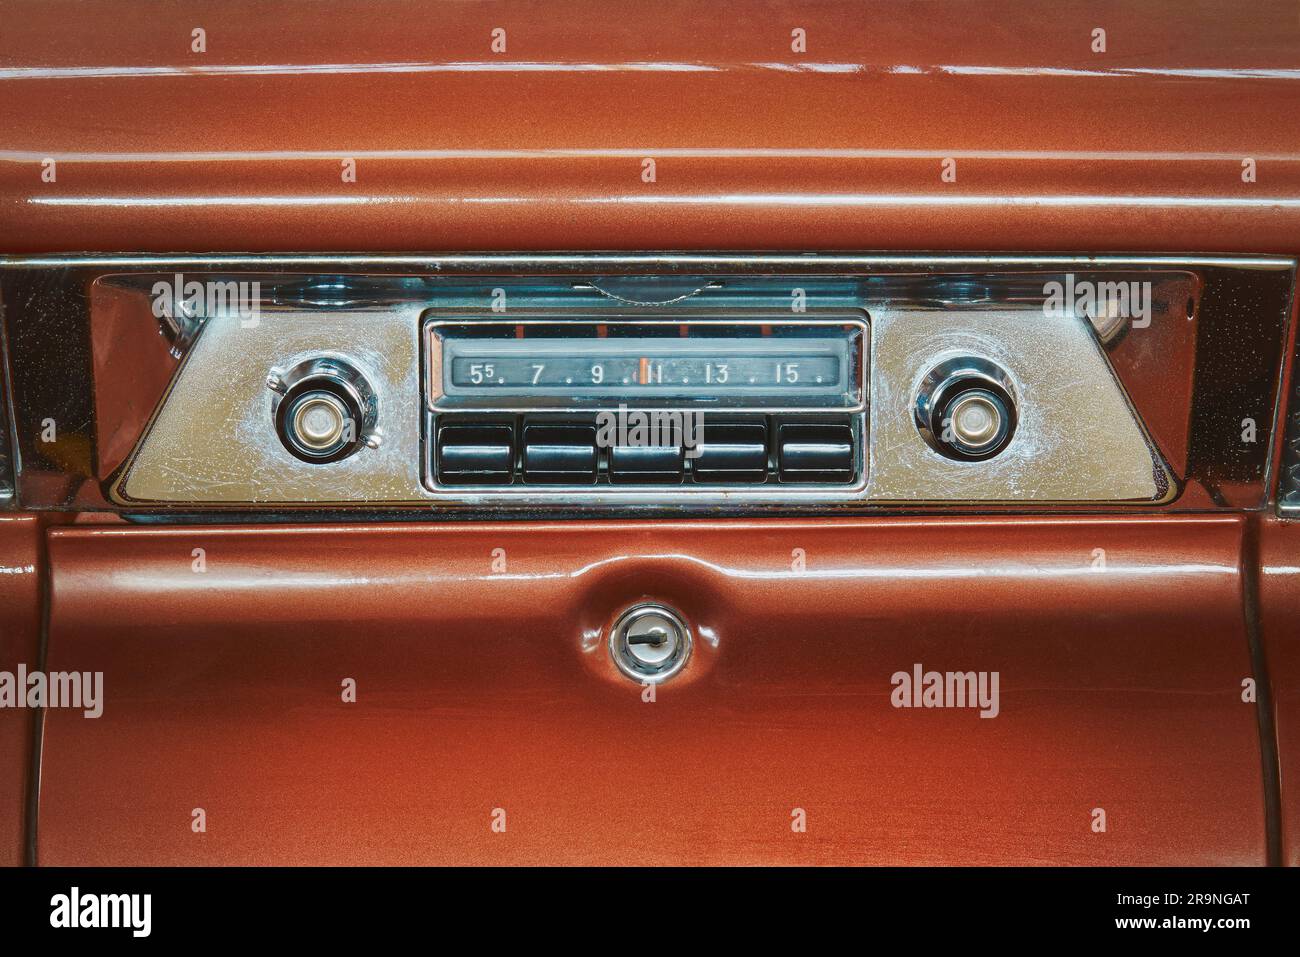 Old car radio inside a red classic American car Stock Photo